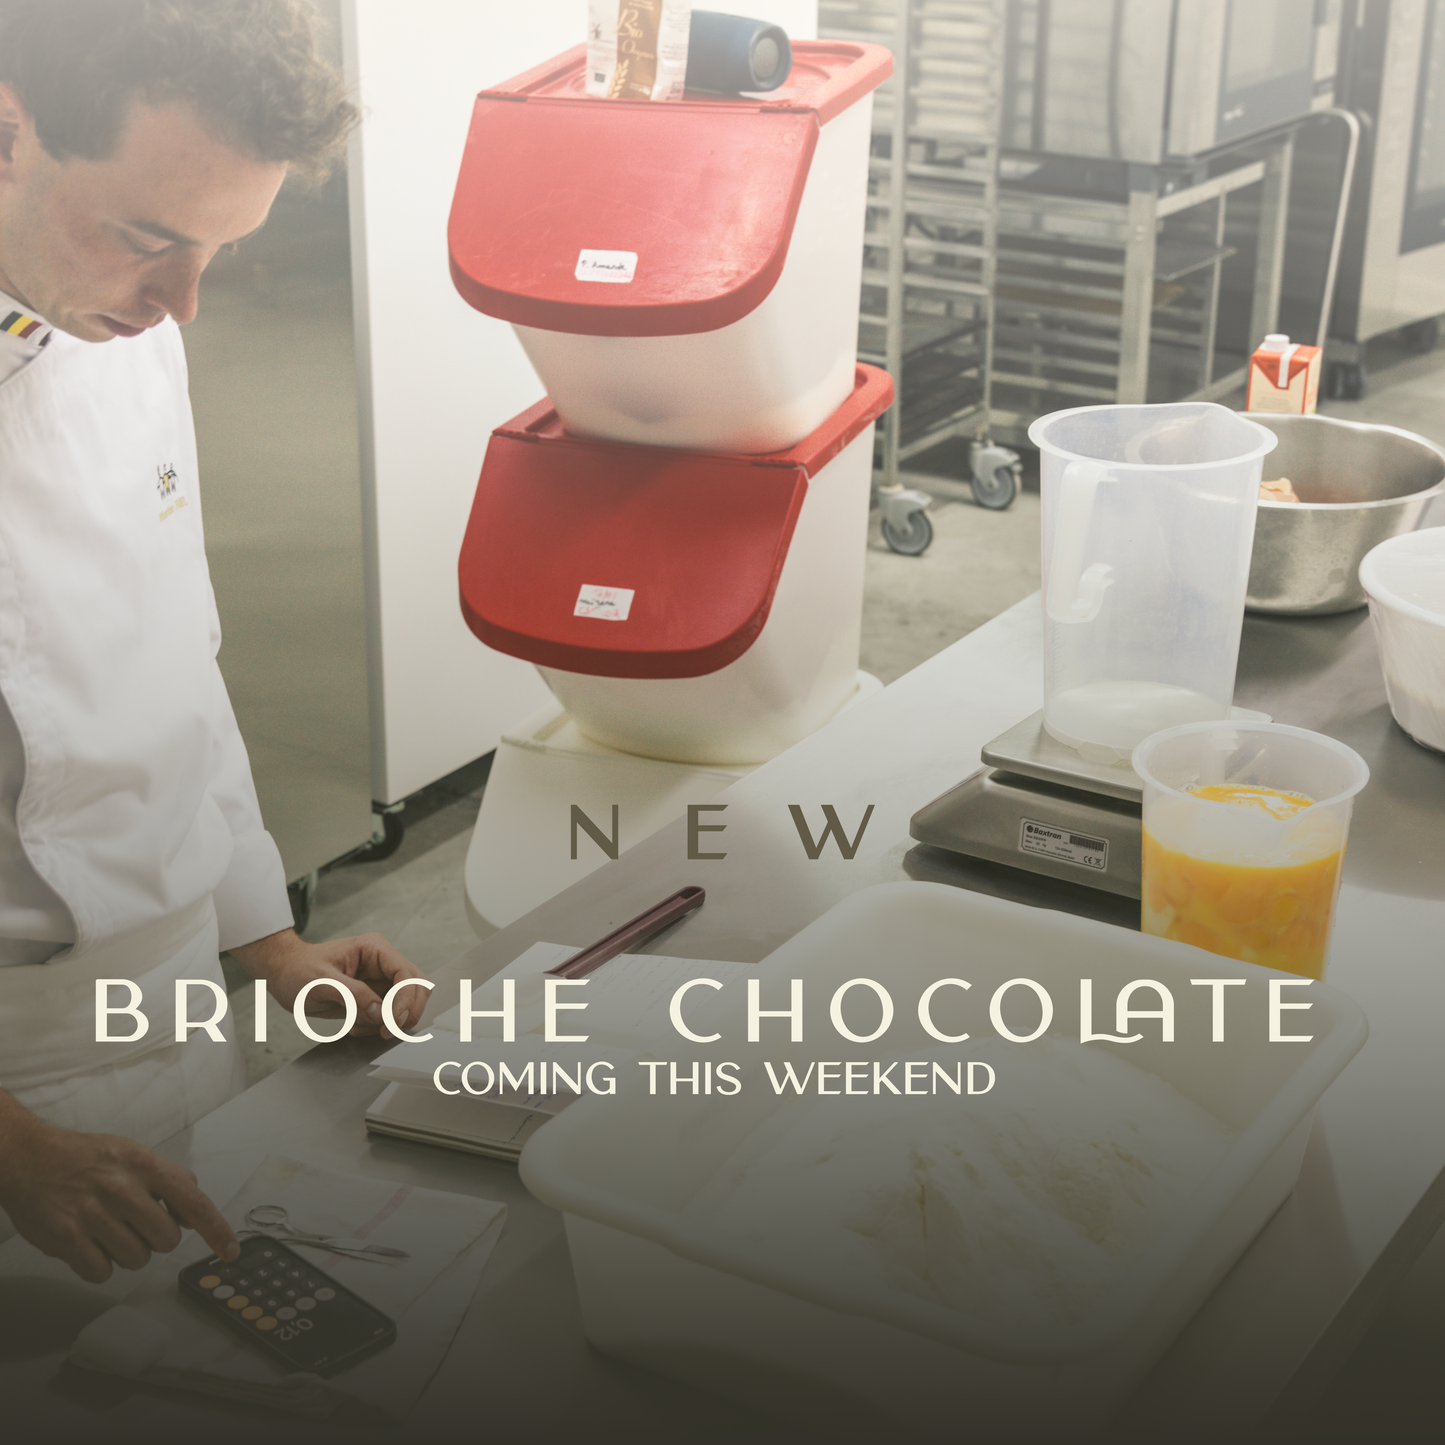 New Brioche Chocolate coming this weekend.